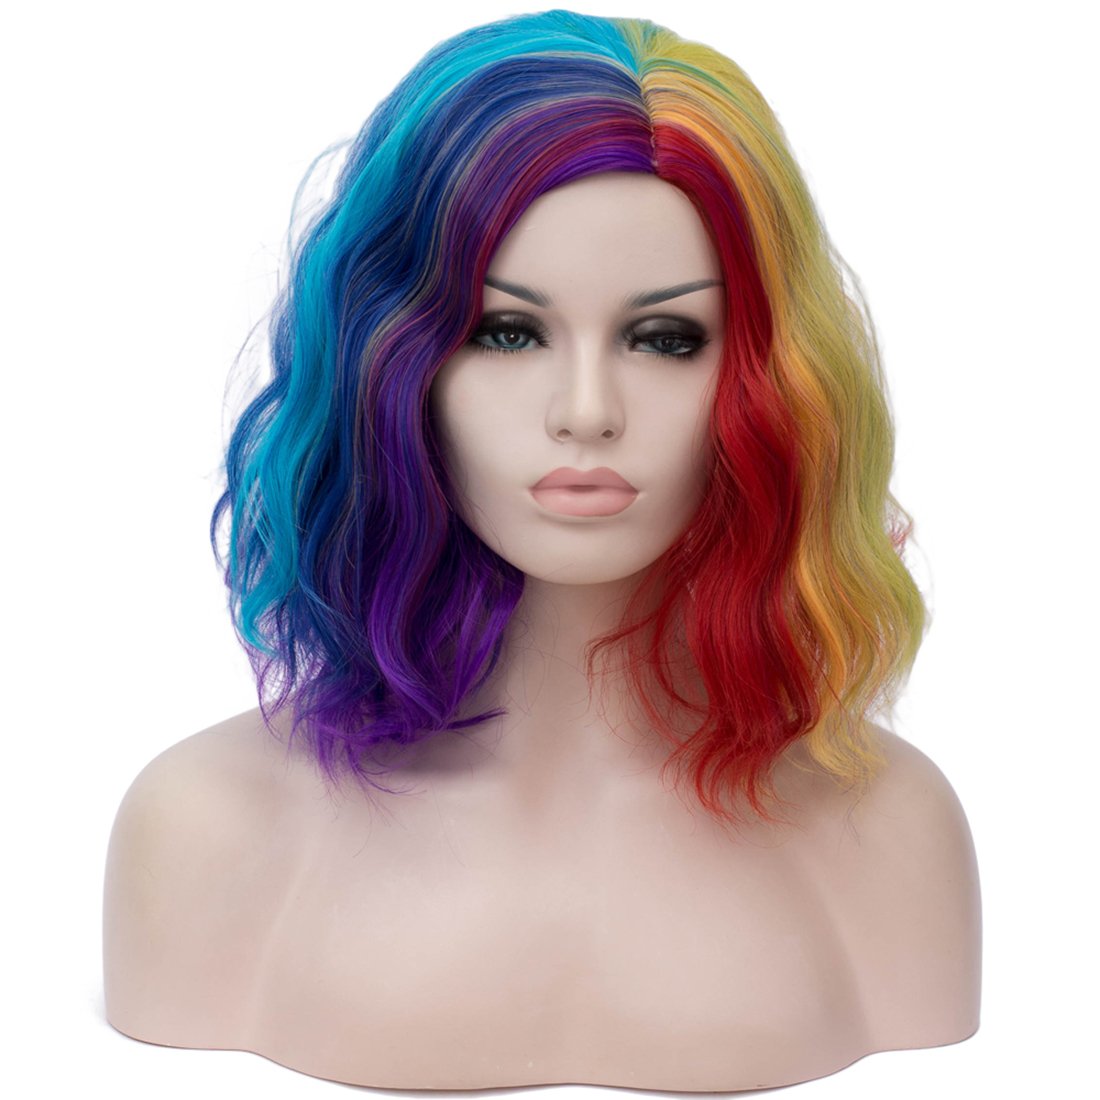 Price:$5.62     BUFASHION 14" Women Short Multi-colored Kinky Straight Cosplay Synthetic Wigs With Air Bangs 46 Colors Available (Multi-colored)   Beauty